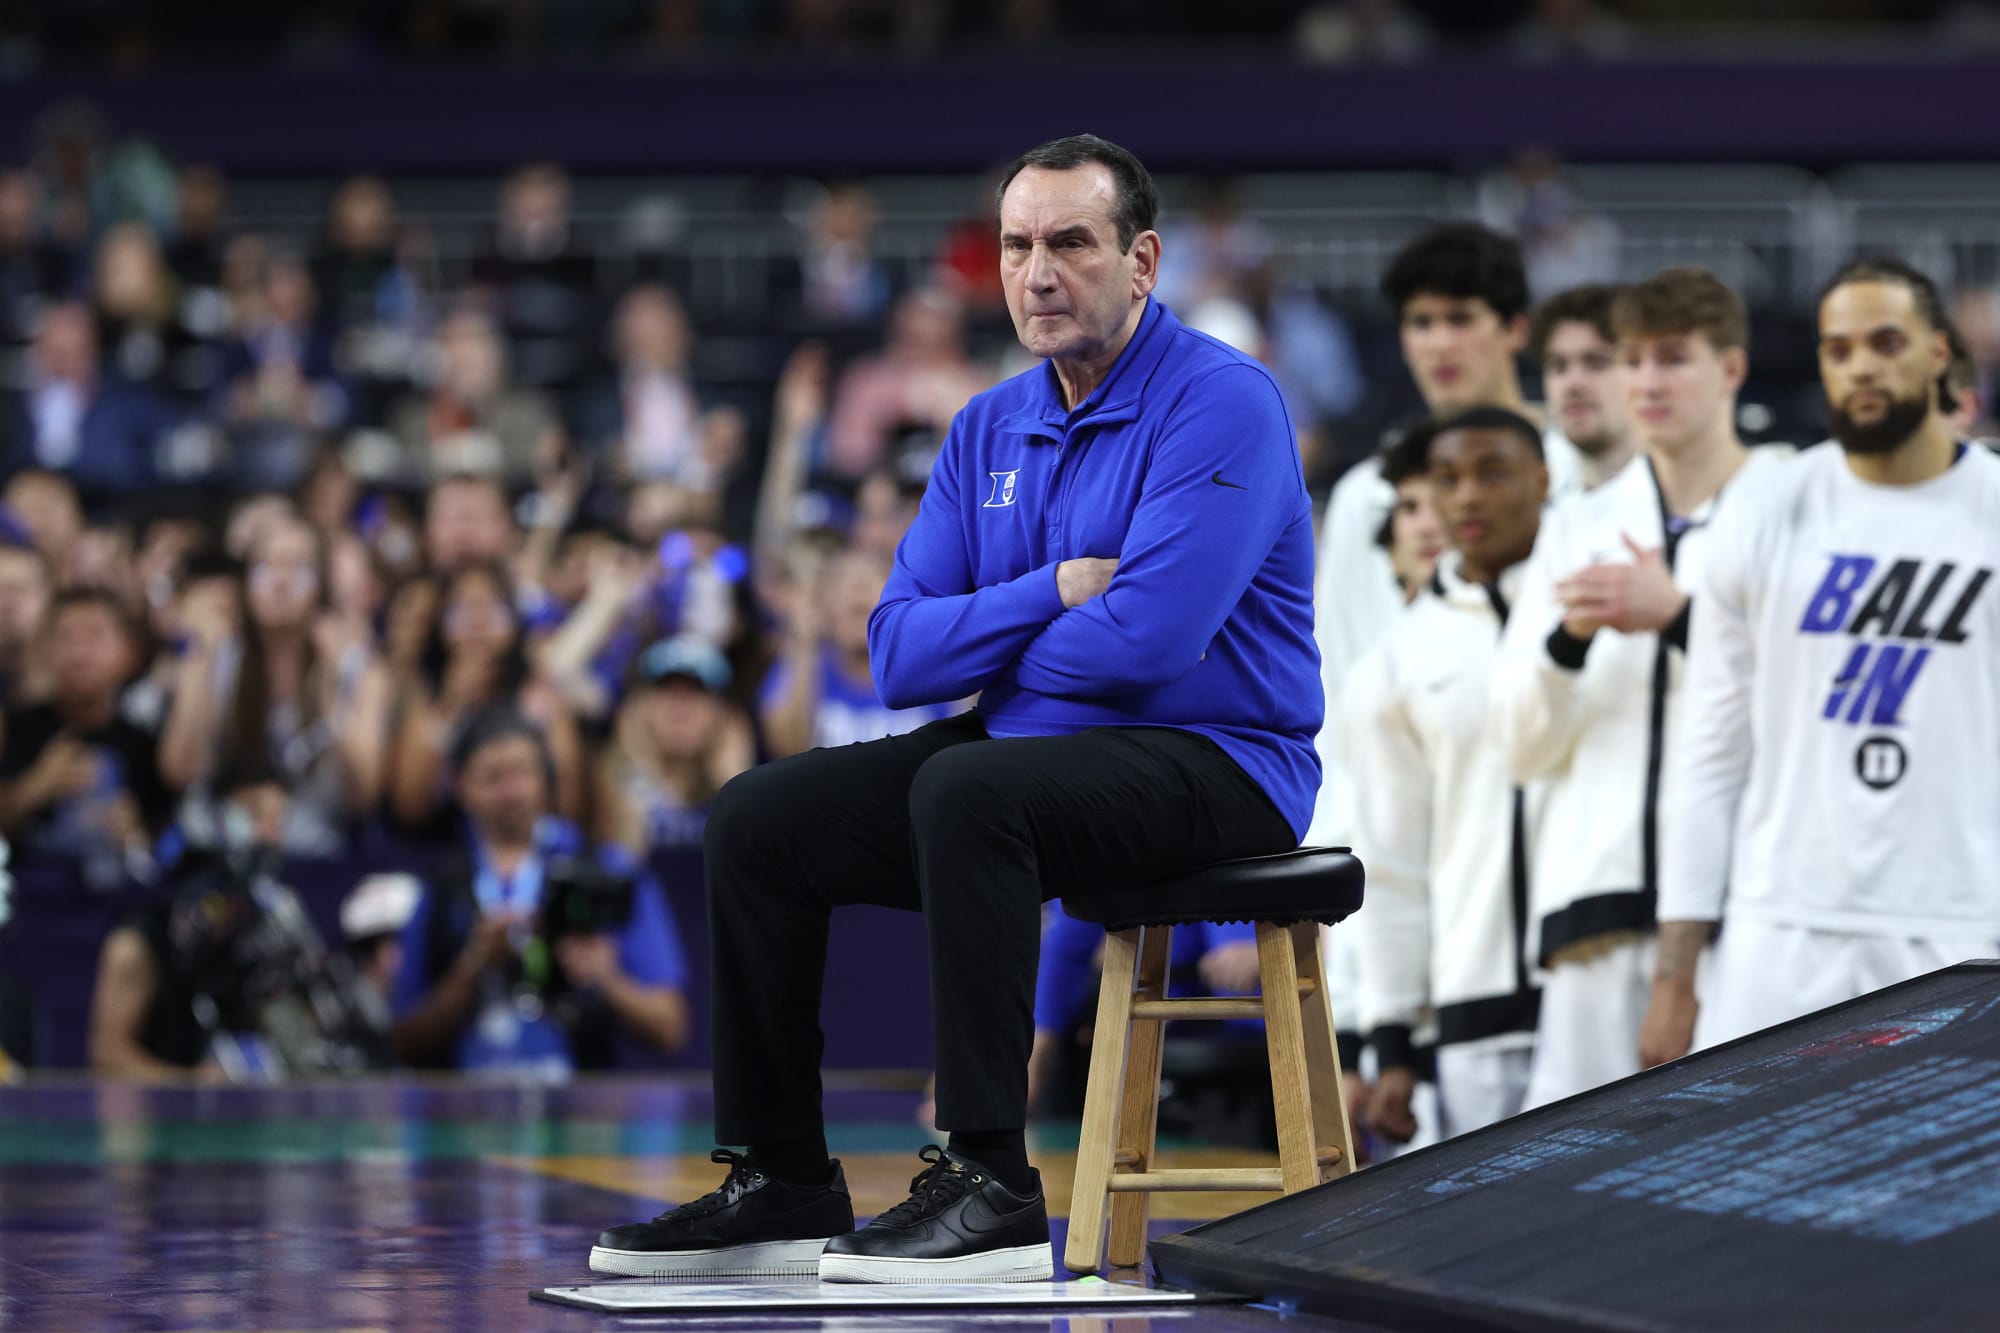 March Madness 2022: Coach K and Duke choked vs. UNC in Final Four thumbnail